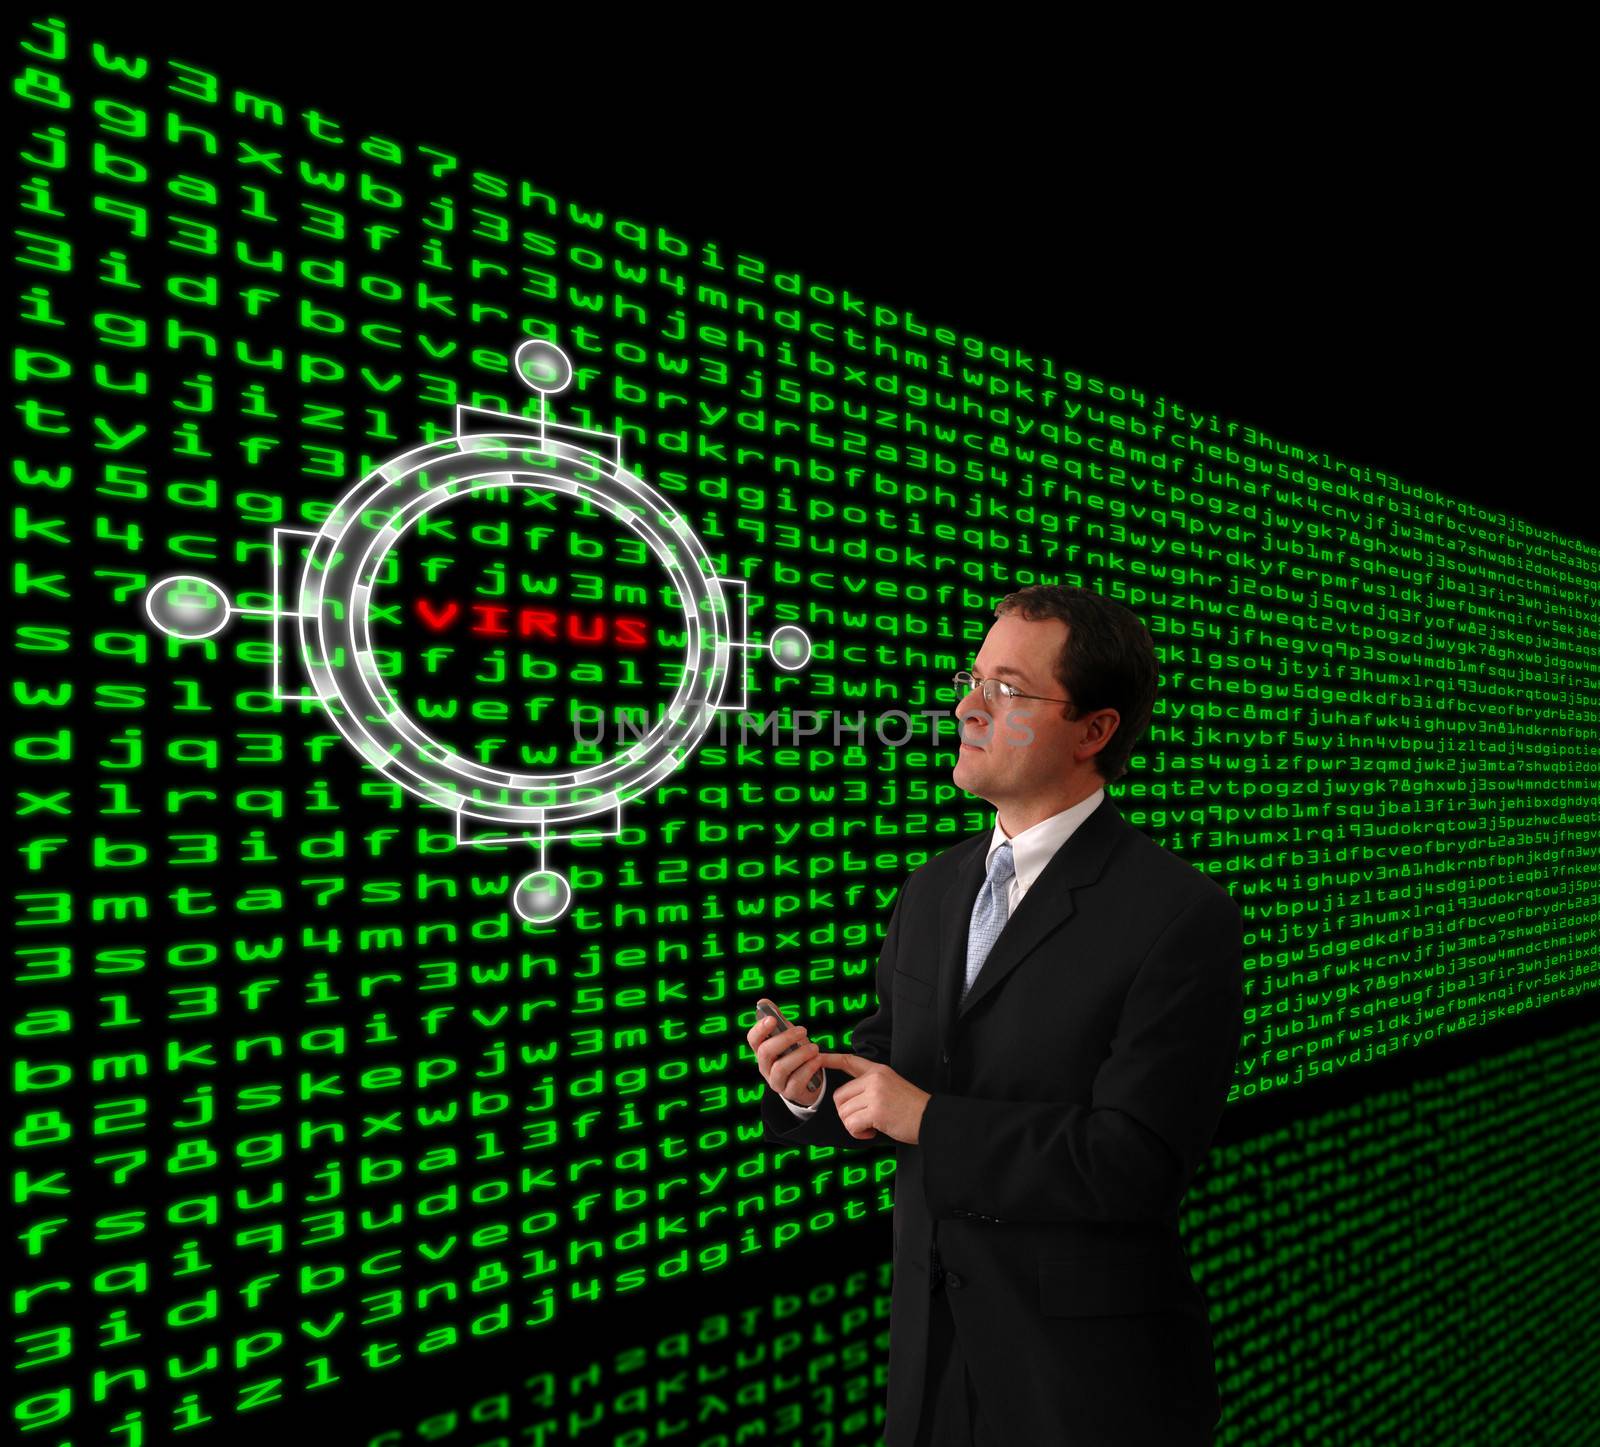 Man in a suit detecting computer virus in a firewall of machine code